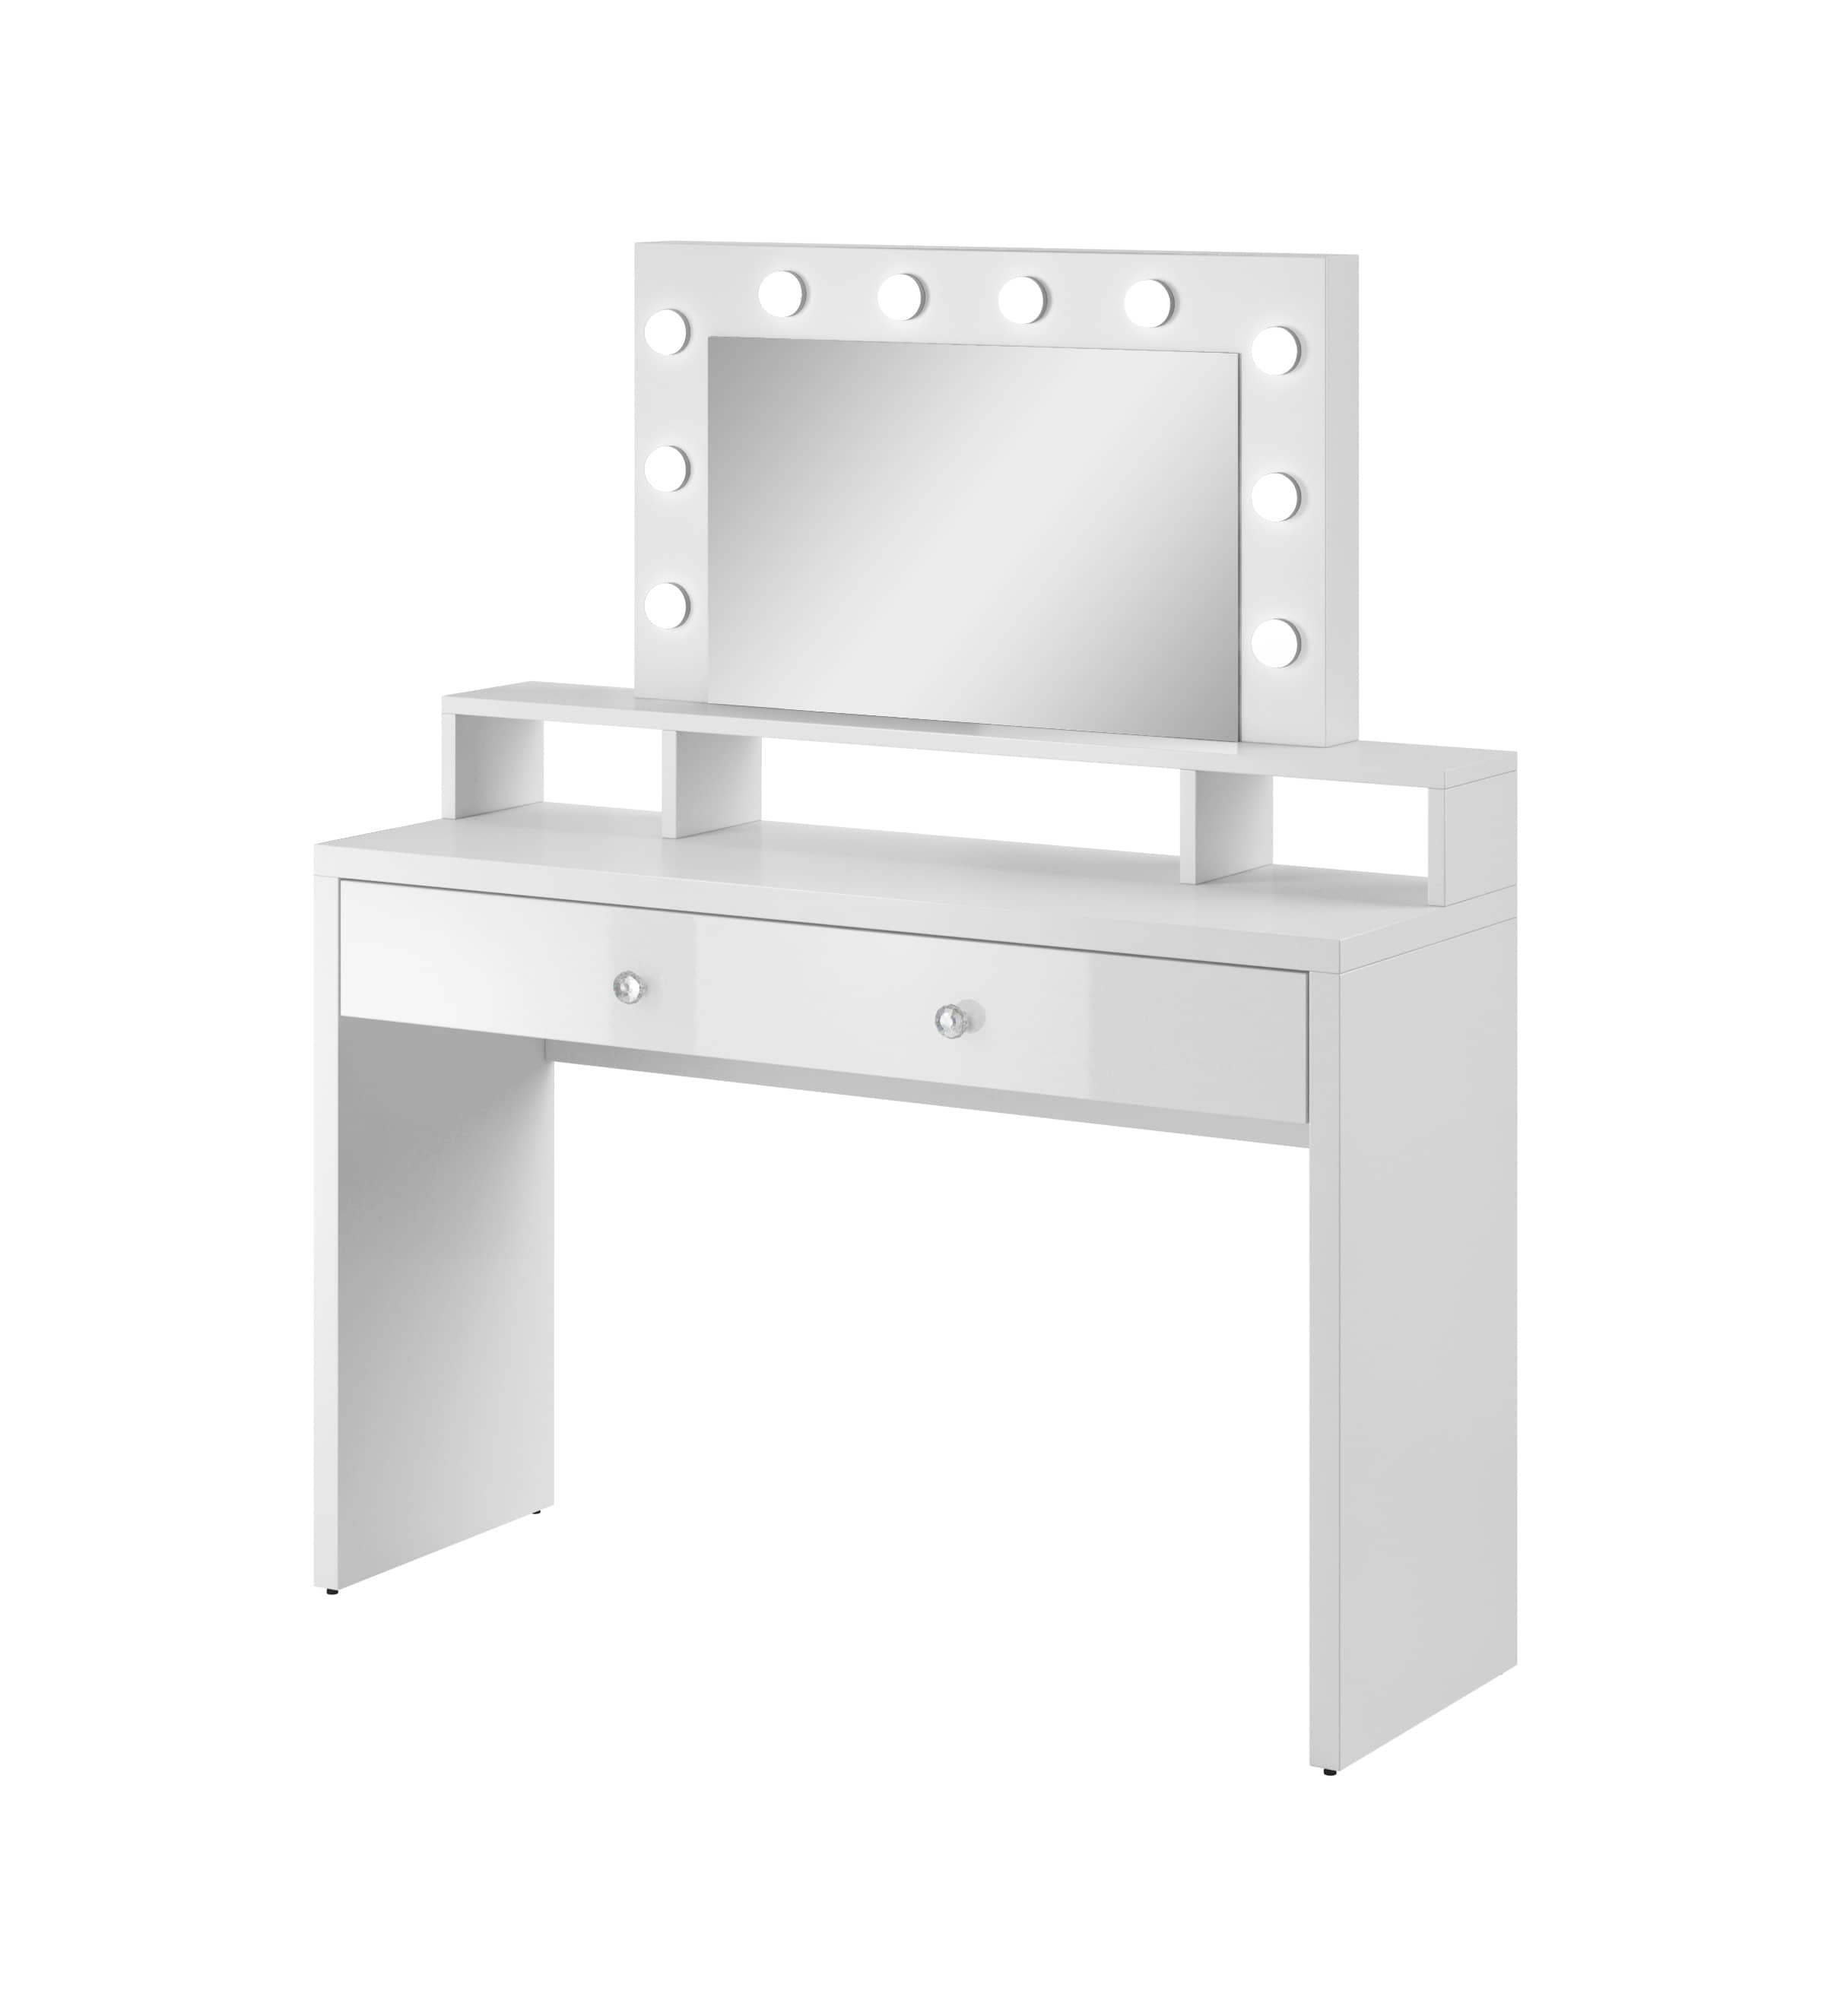 View Aria Dressing Table With Mirror information